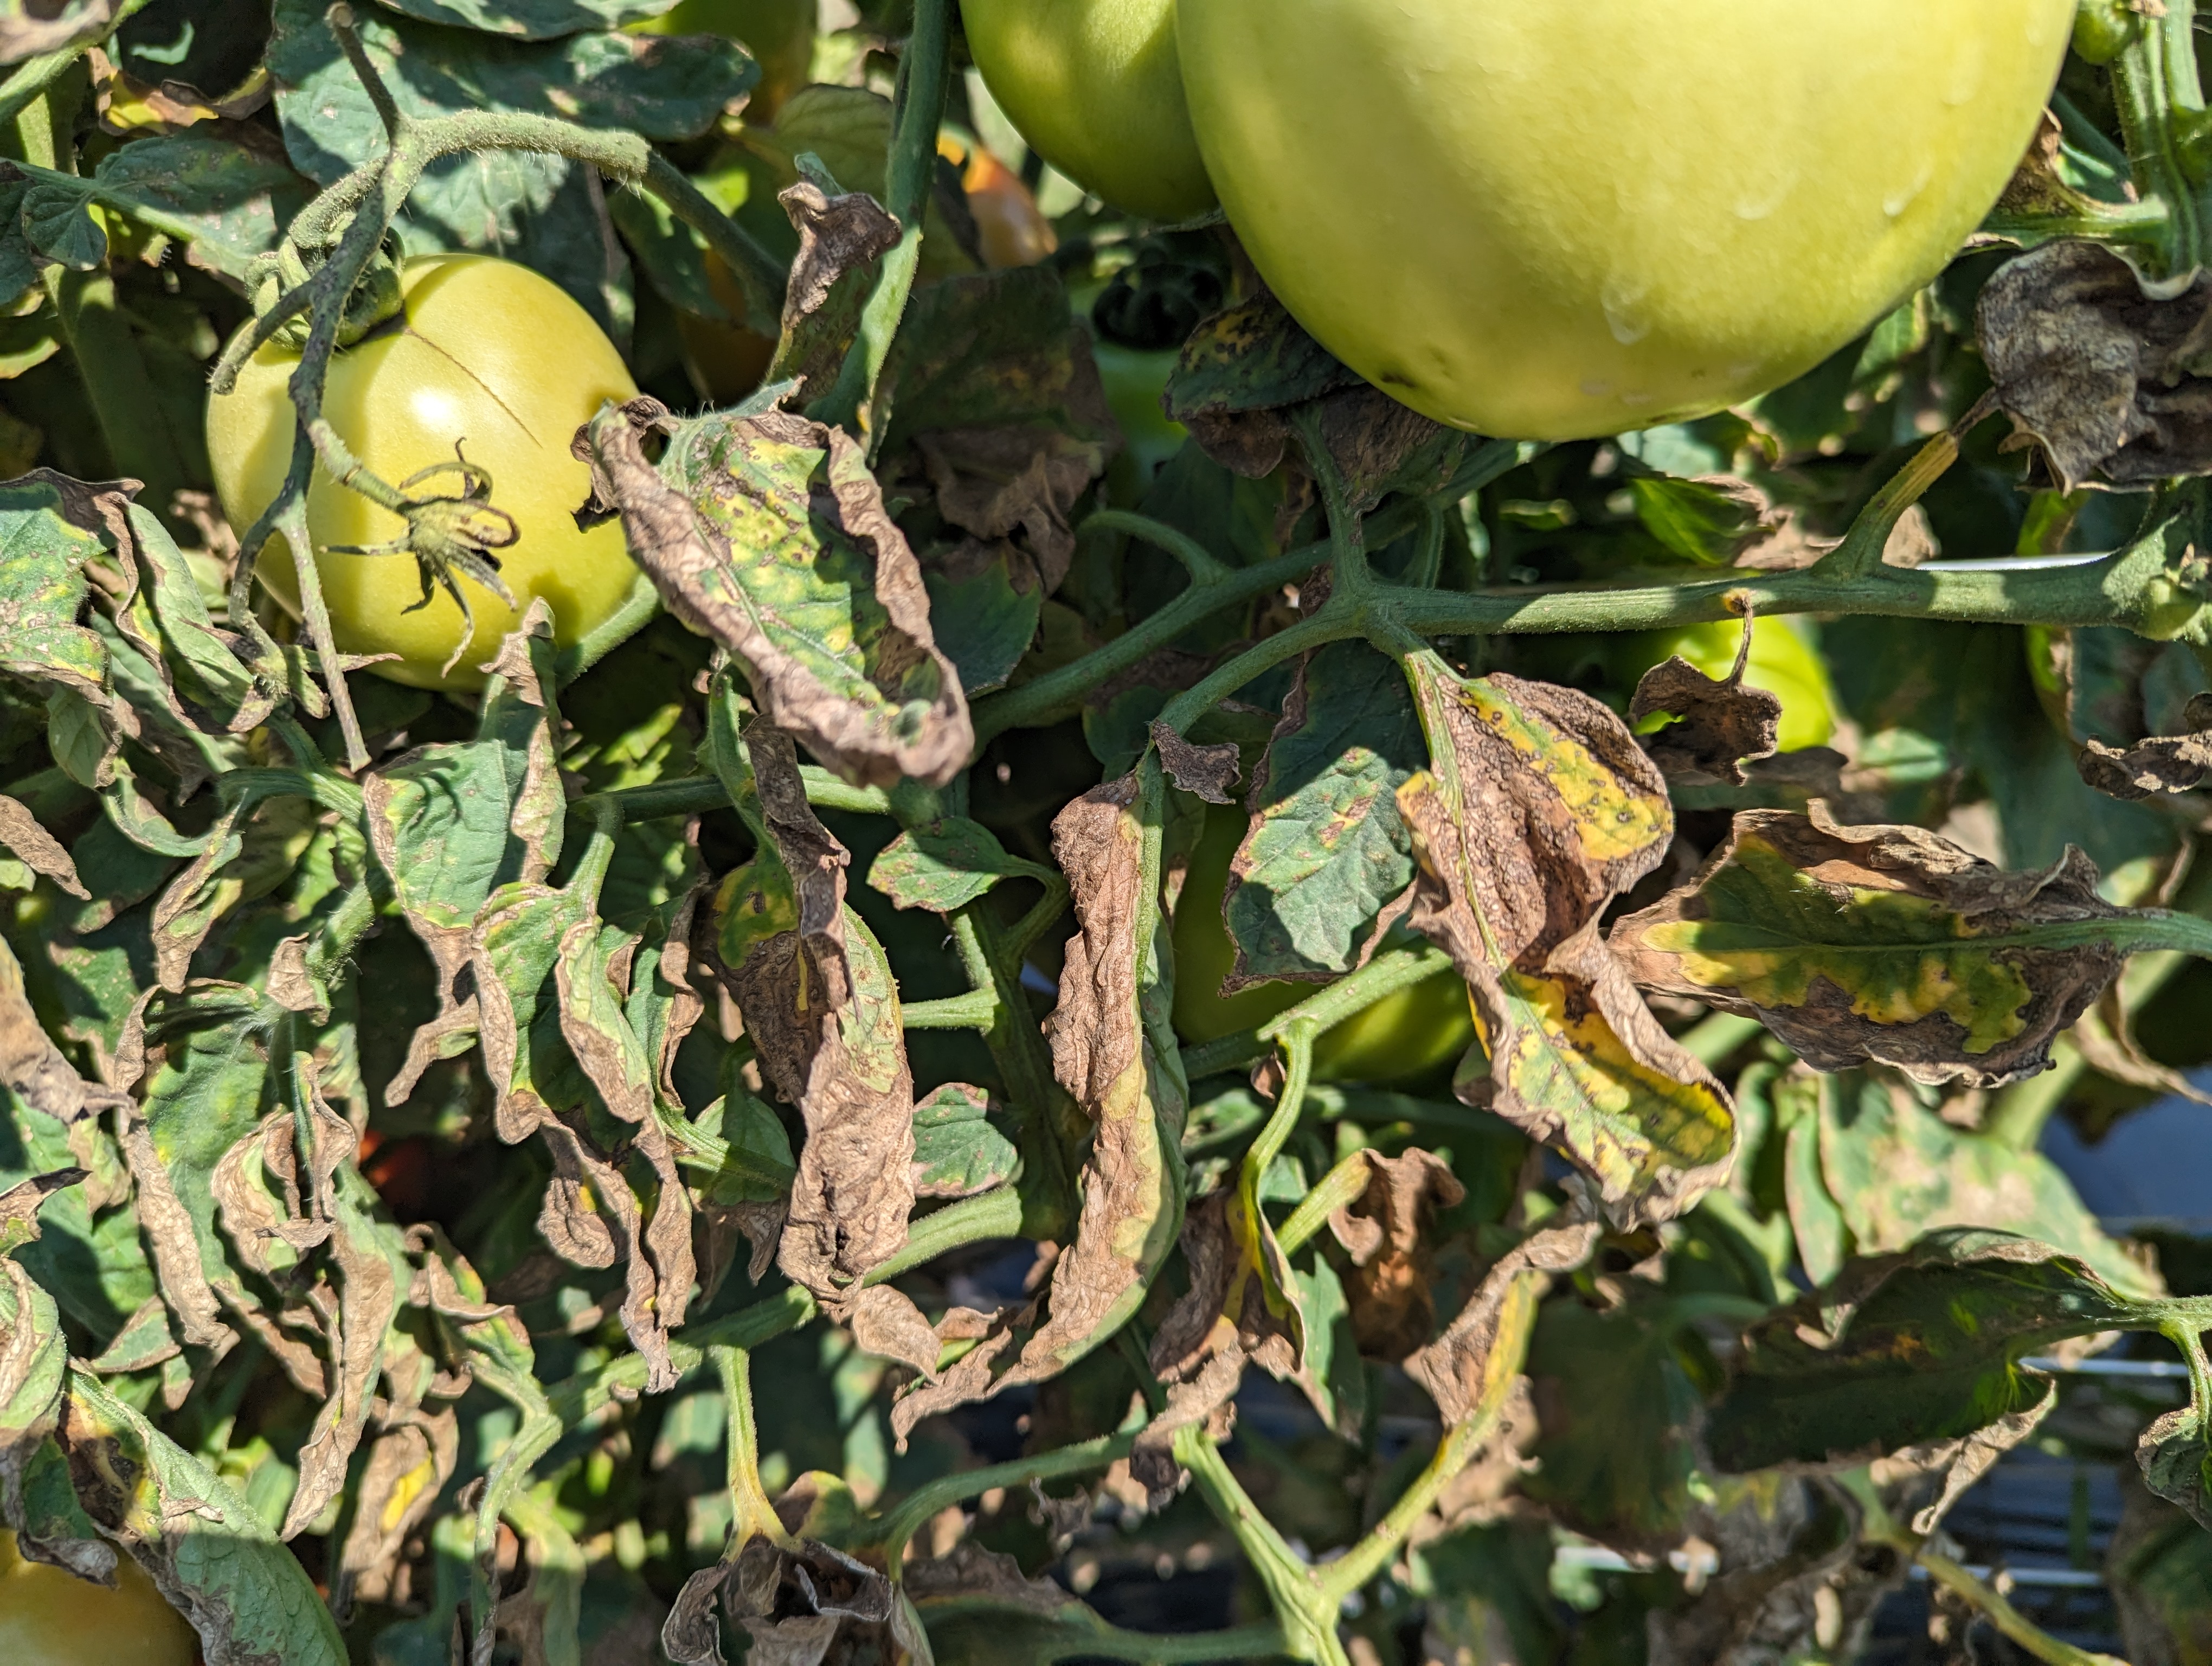 Bacterial canker symptoms in tomatoes.